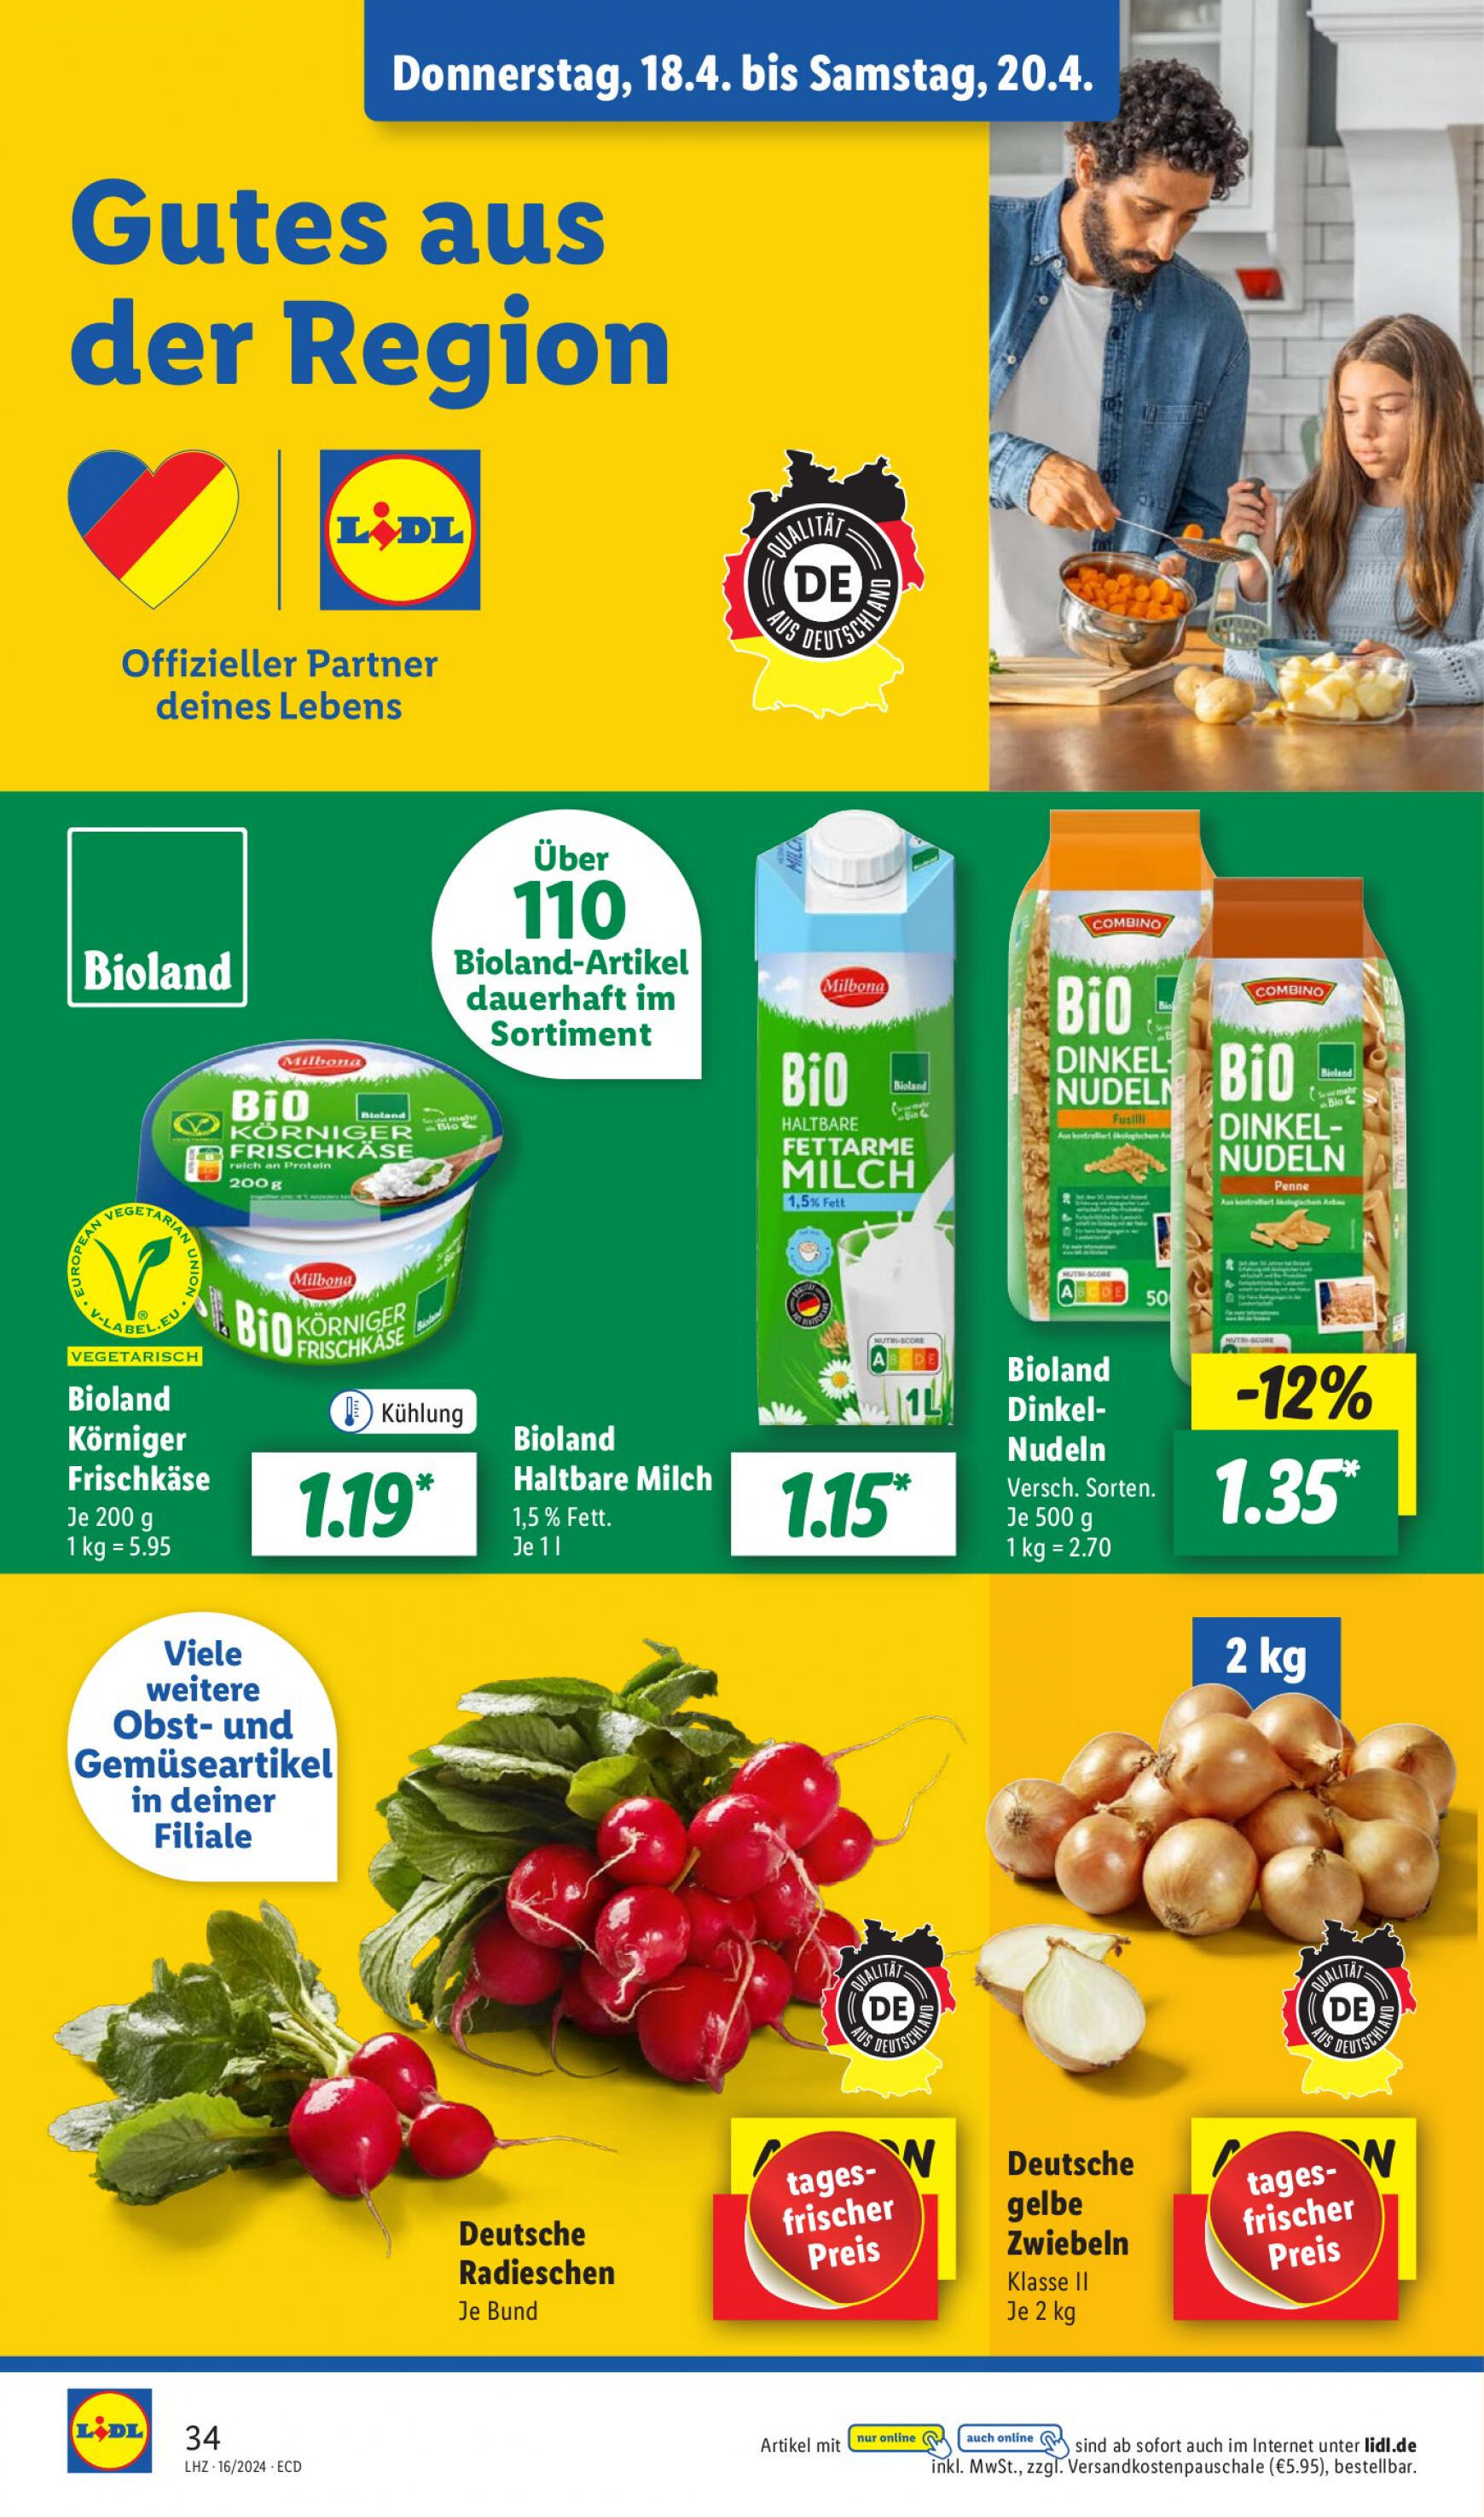 lidl - Flyer Lidl aktuell 15.04. - 20.04. - page: 44